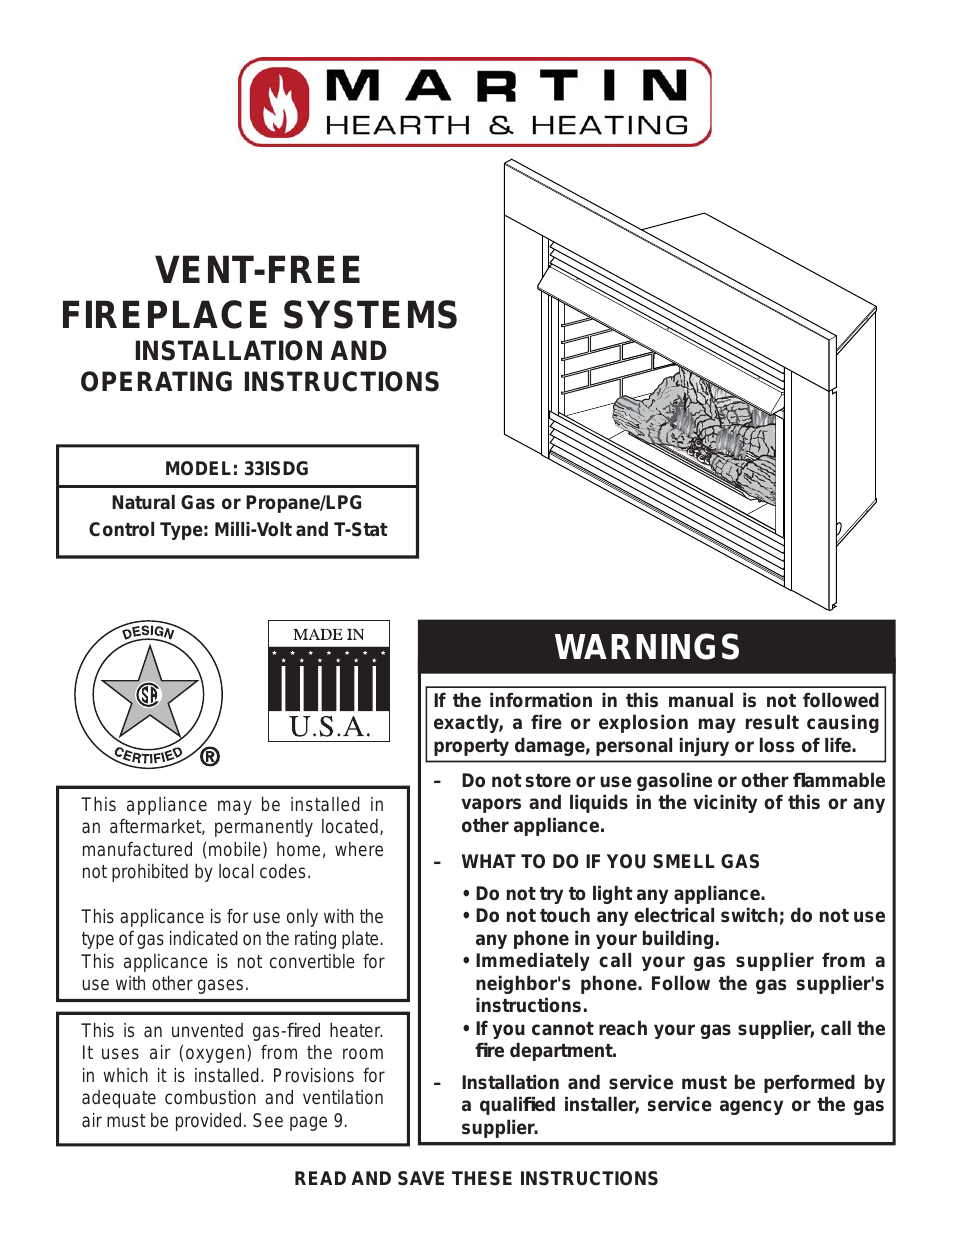 VENT-FREE FIREPLACE SYSTEMS 33ISDG